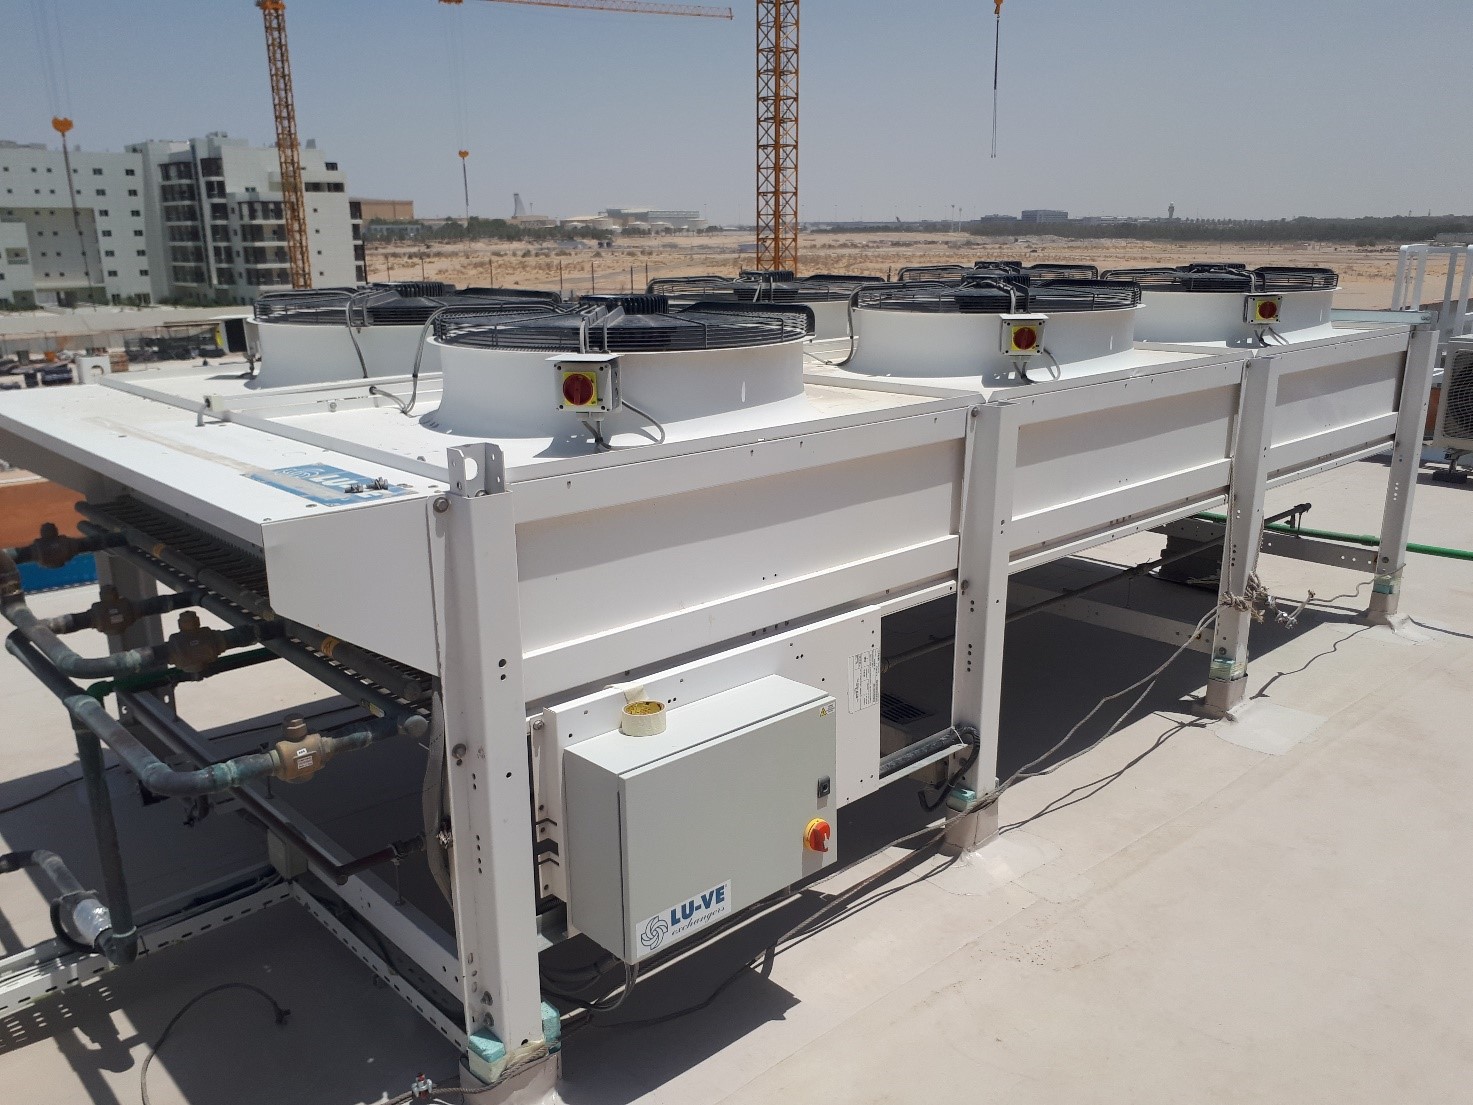 Carrefour Masdar City<br>
Super market cold stores and preparation rooms<br>
<br>
Evaporator:<br>
20 x F31HC/F35HC CO2, FHD CO2,<br>
<br>
Gas Cooler:<br>
1 x SAV9T 3232 CO2 + P25 + EC + IS<br>
<br>
First CO2 installation in the GCC countries.<br>
Masdar City is the first sustainable city in the GCC, where “green” initiatives are implemented.<br>
Technical challenge: CO2 transcritical in an area that reaches 50°C, made possible by LU-VE adiabatic dry cooler.